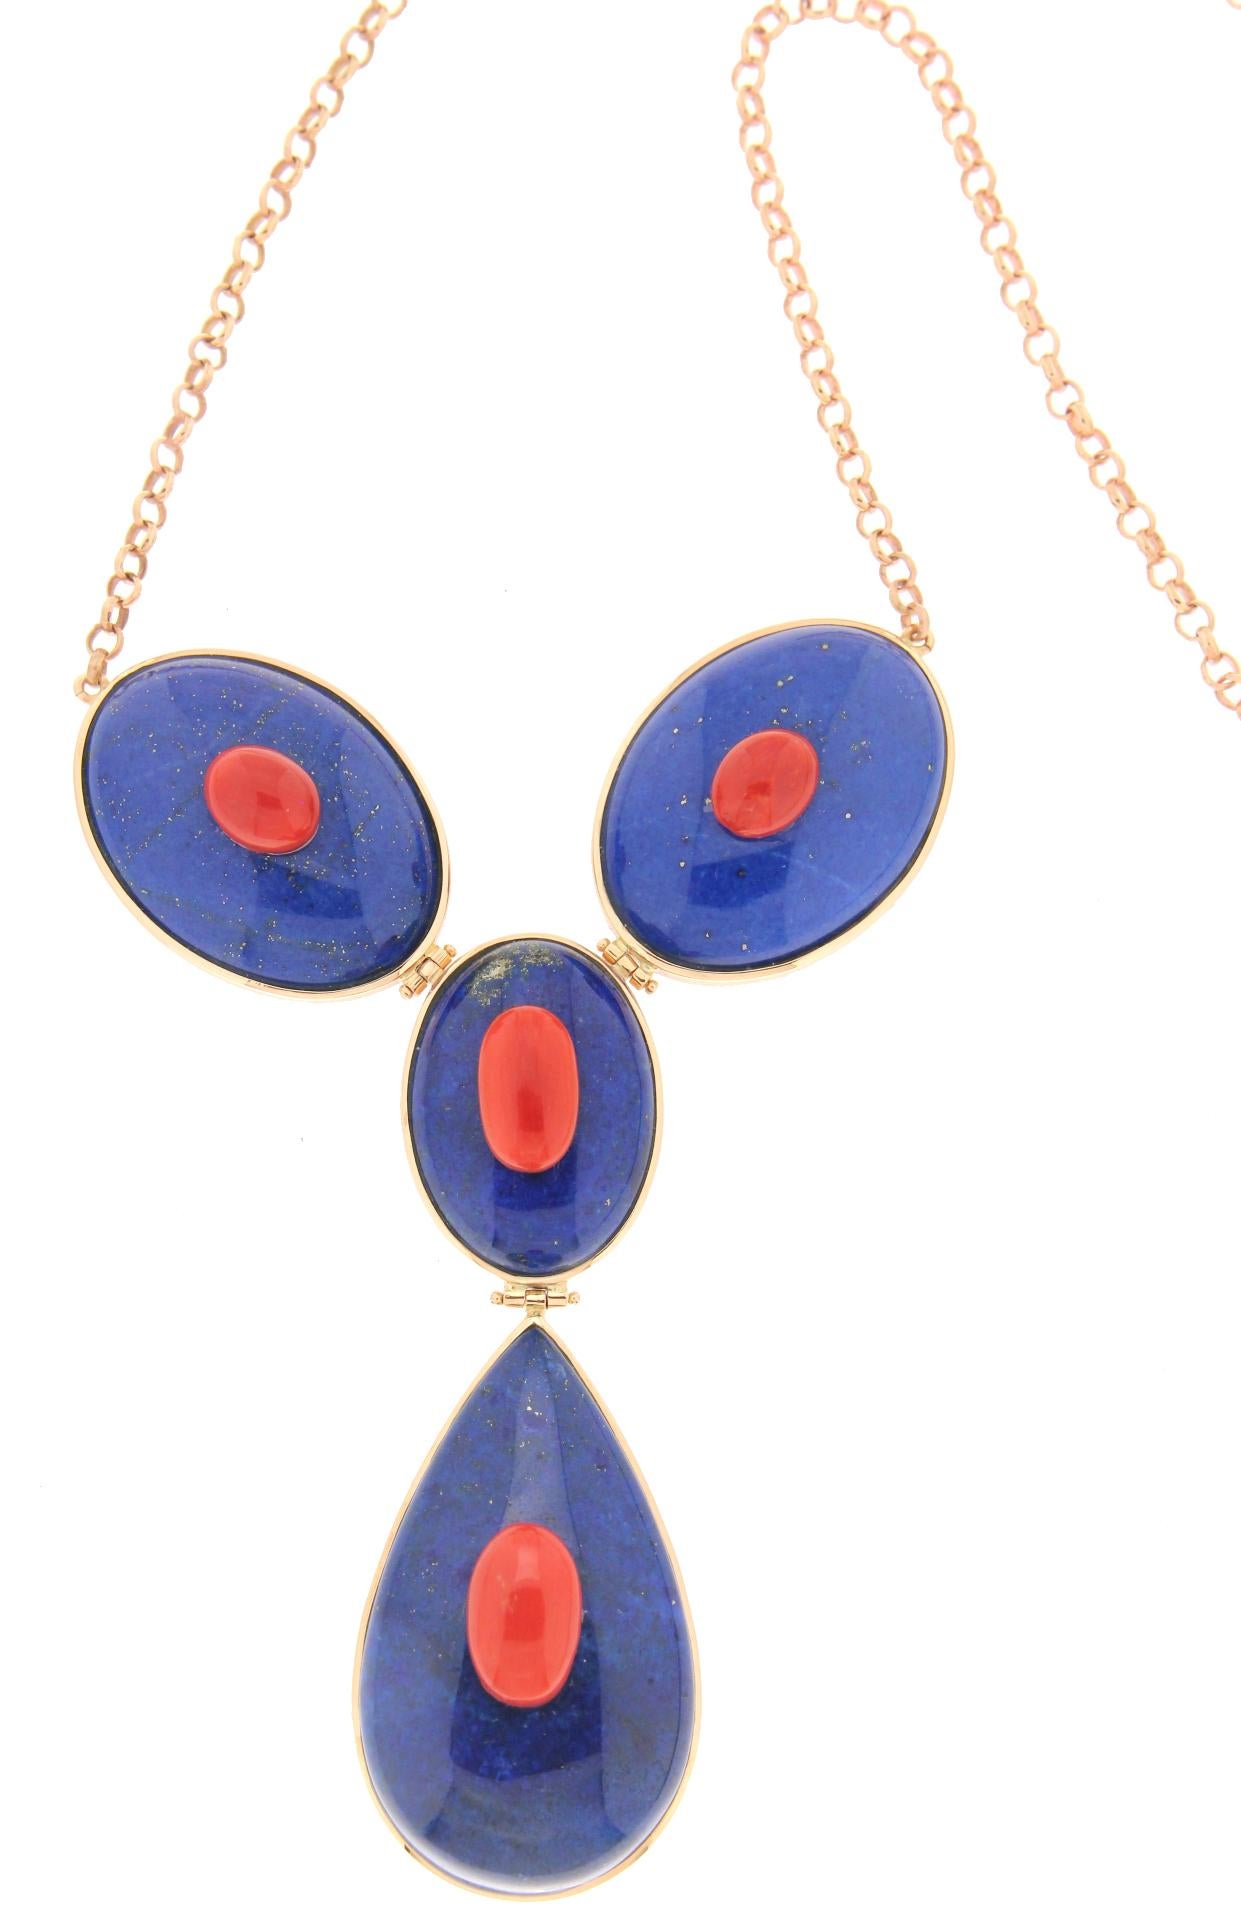 Handcraft Lapis Lazuli 14 Karat Yellow Gold Sardinian Coral Pendant Necklace In New Condition For Sale In Marcianise, IT